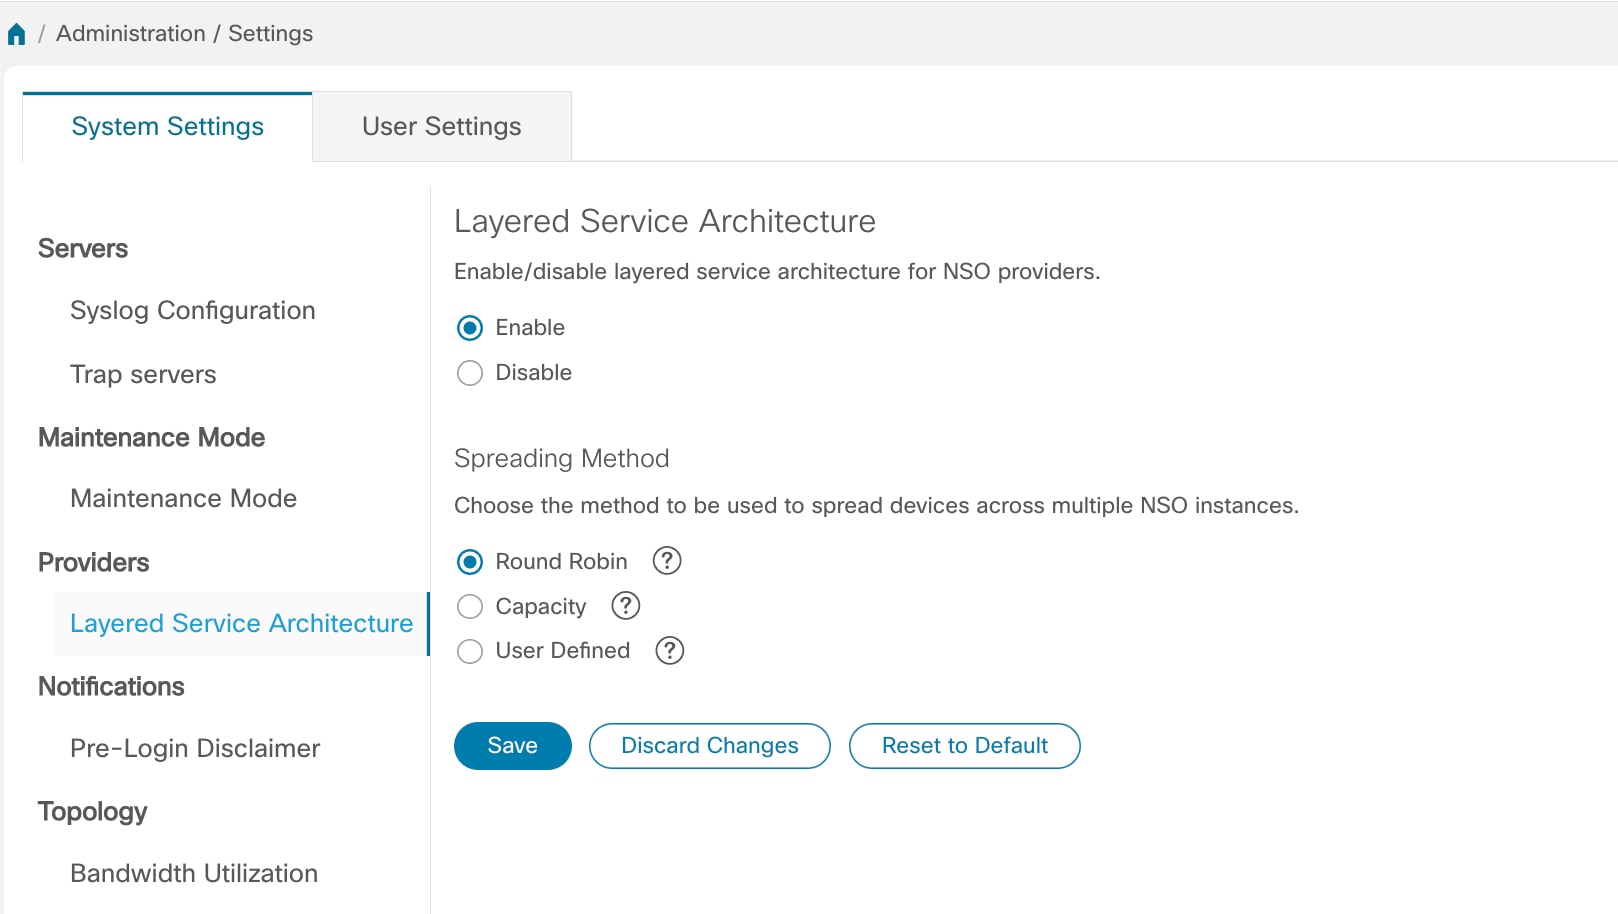 Enabling Layered Service Architecture